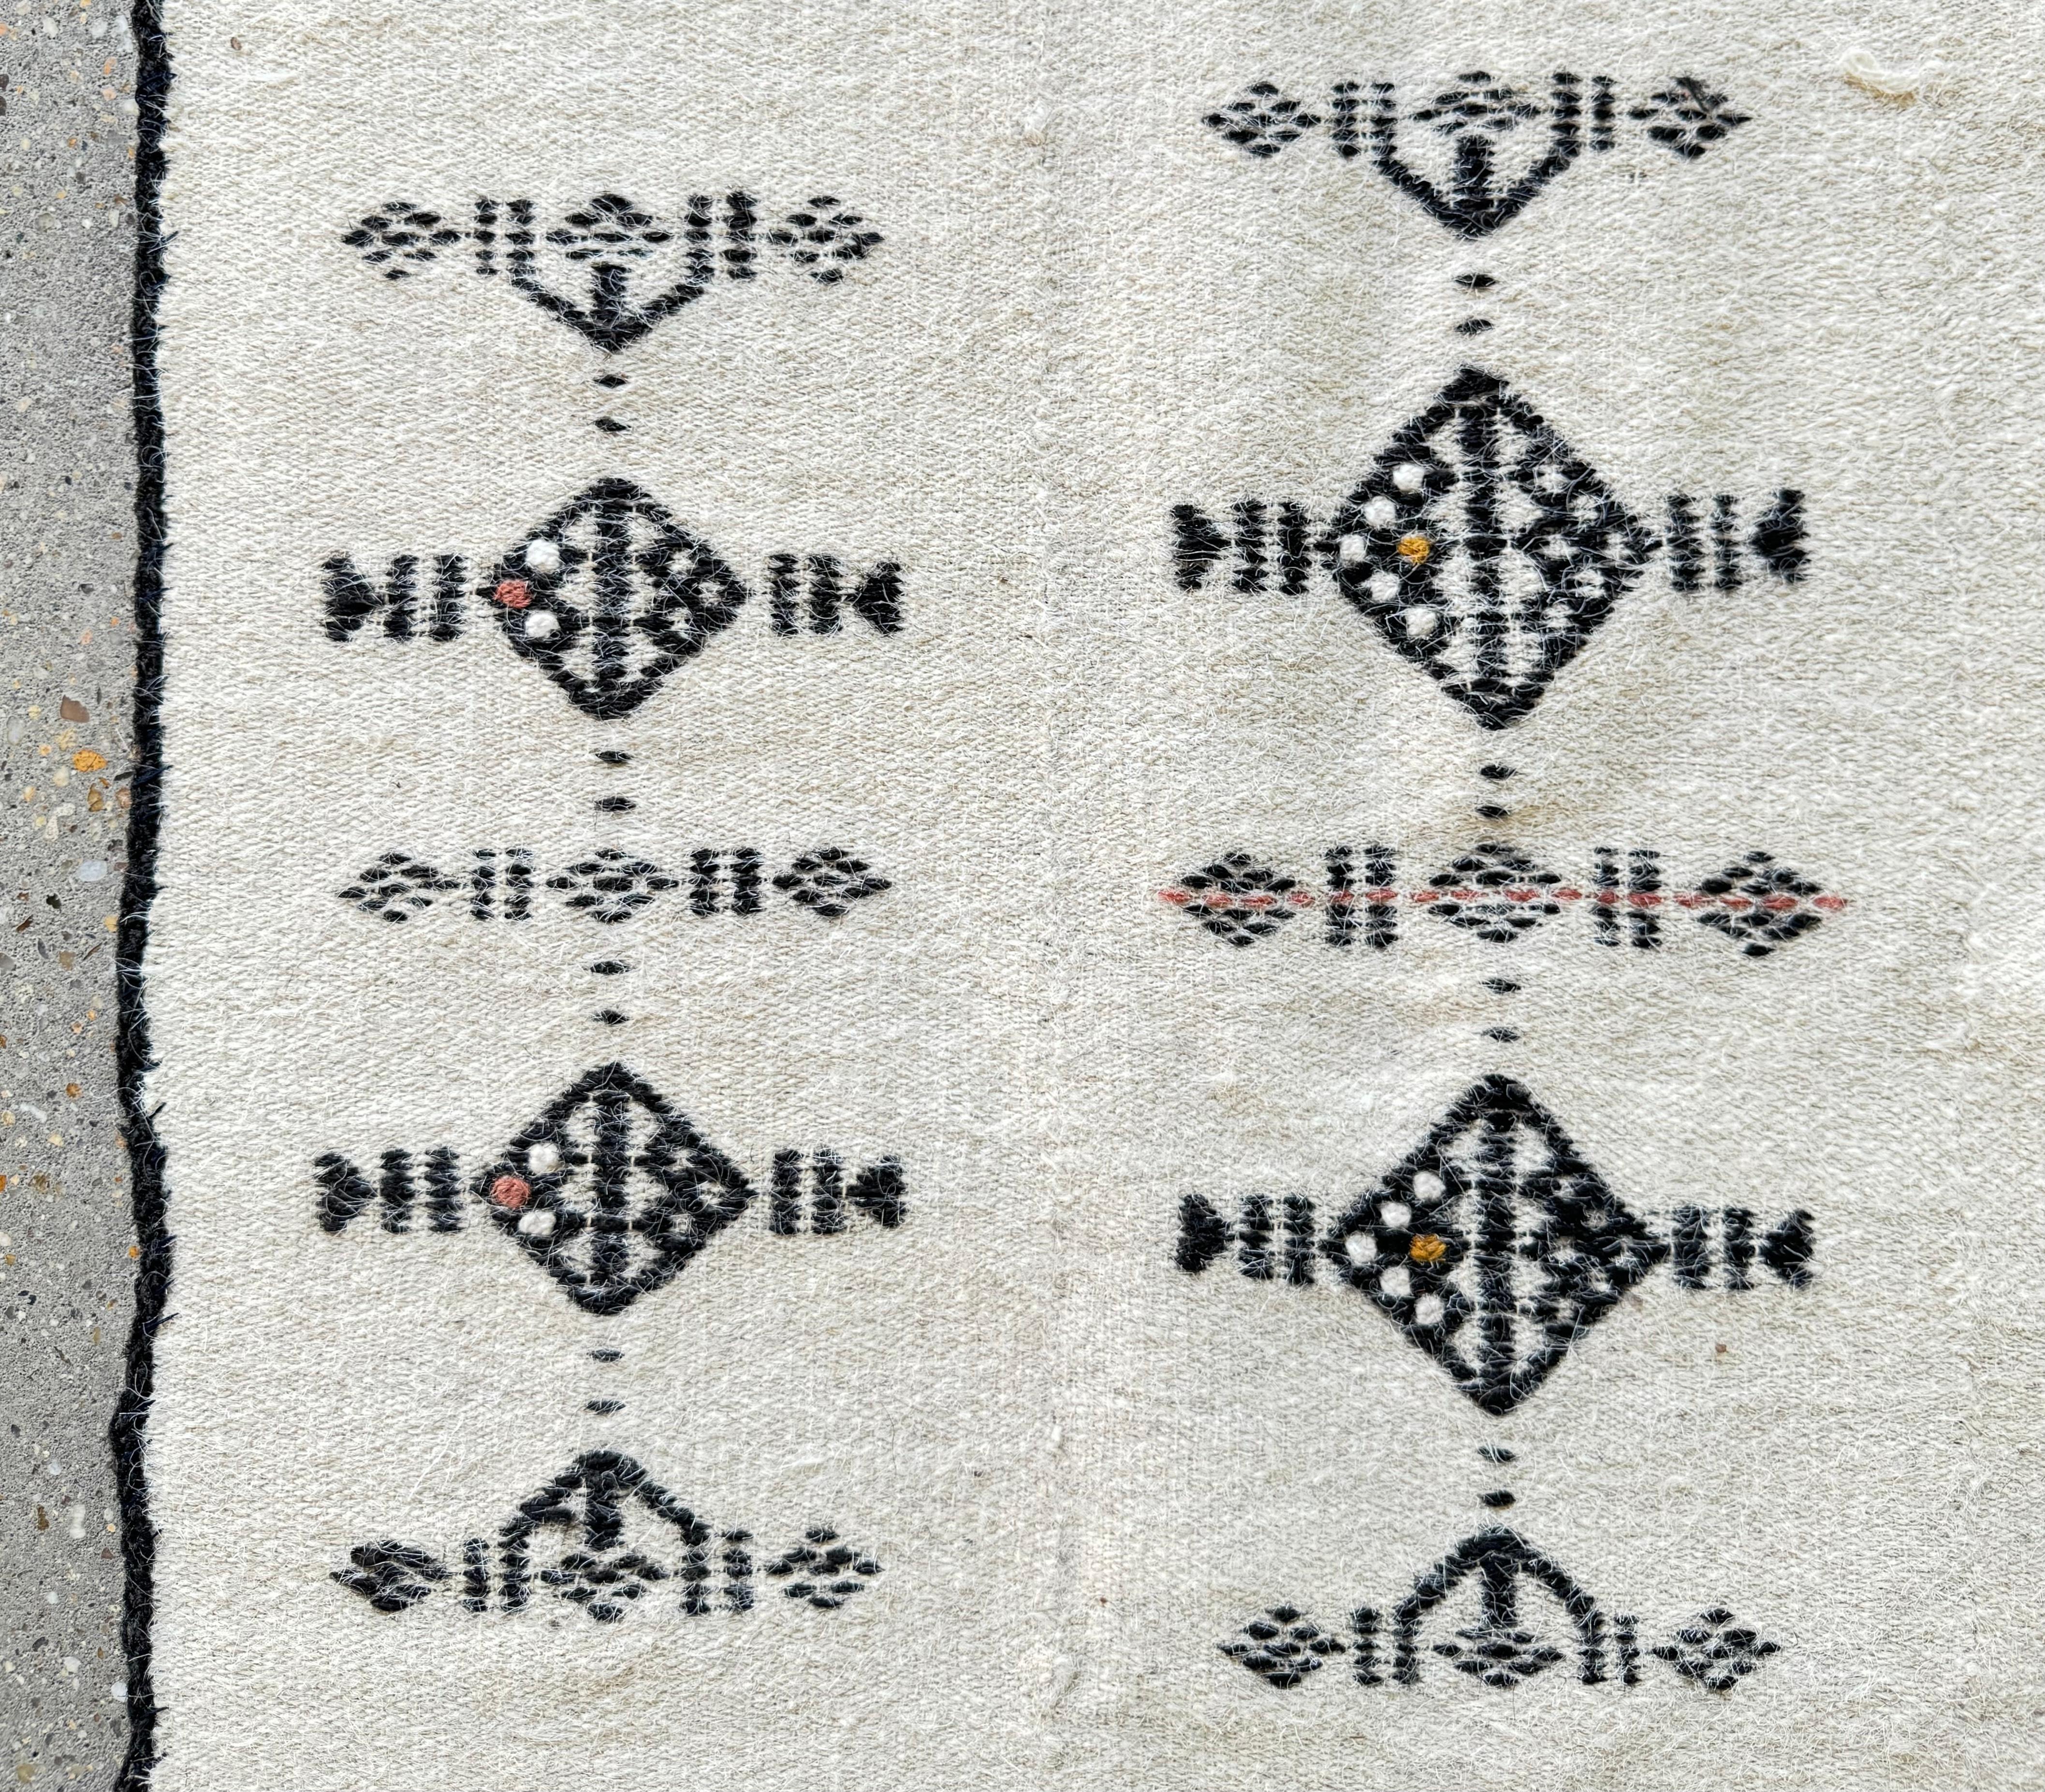 Handwoven using traditional techniques, the materials include locally sourced wool. The use of wool provides warmth and durability, making these textiles suitable for various purposes.

The design of the textile features a combination of geometric